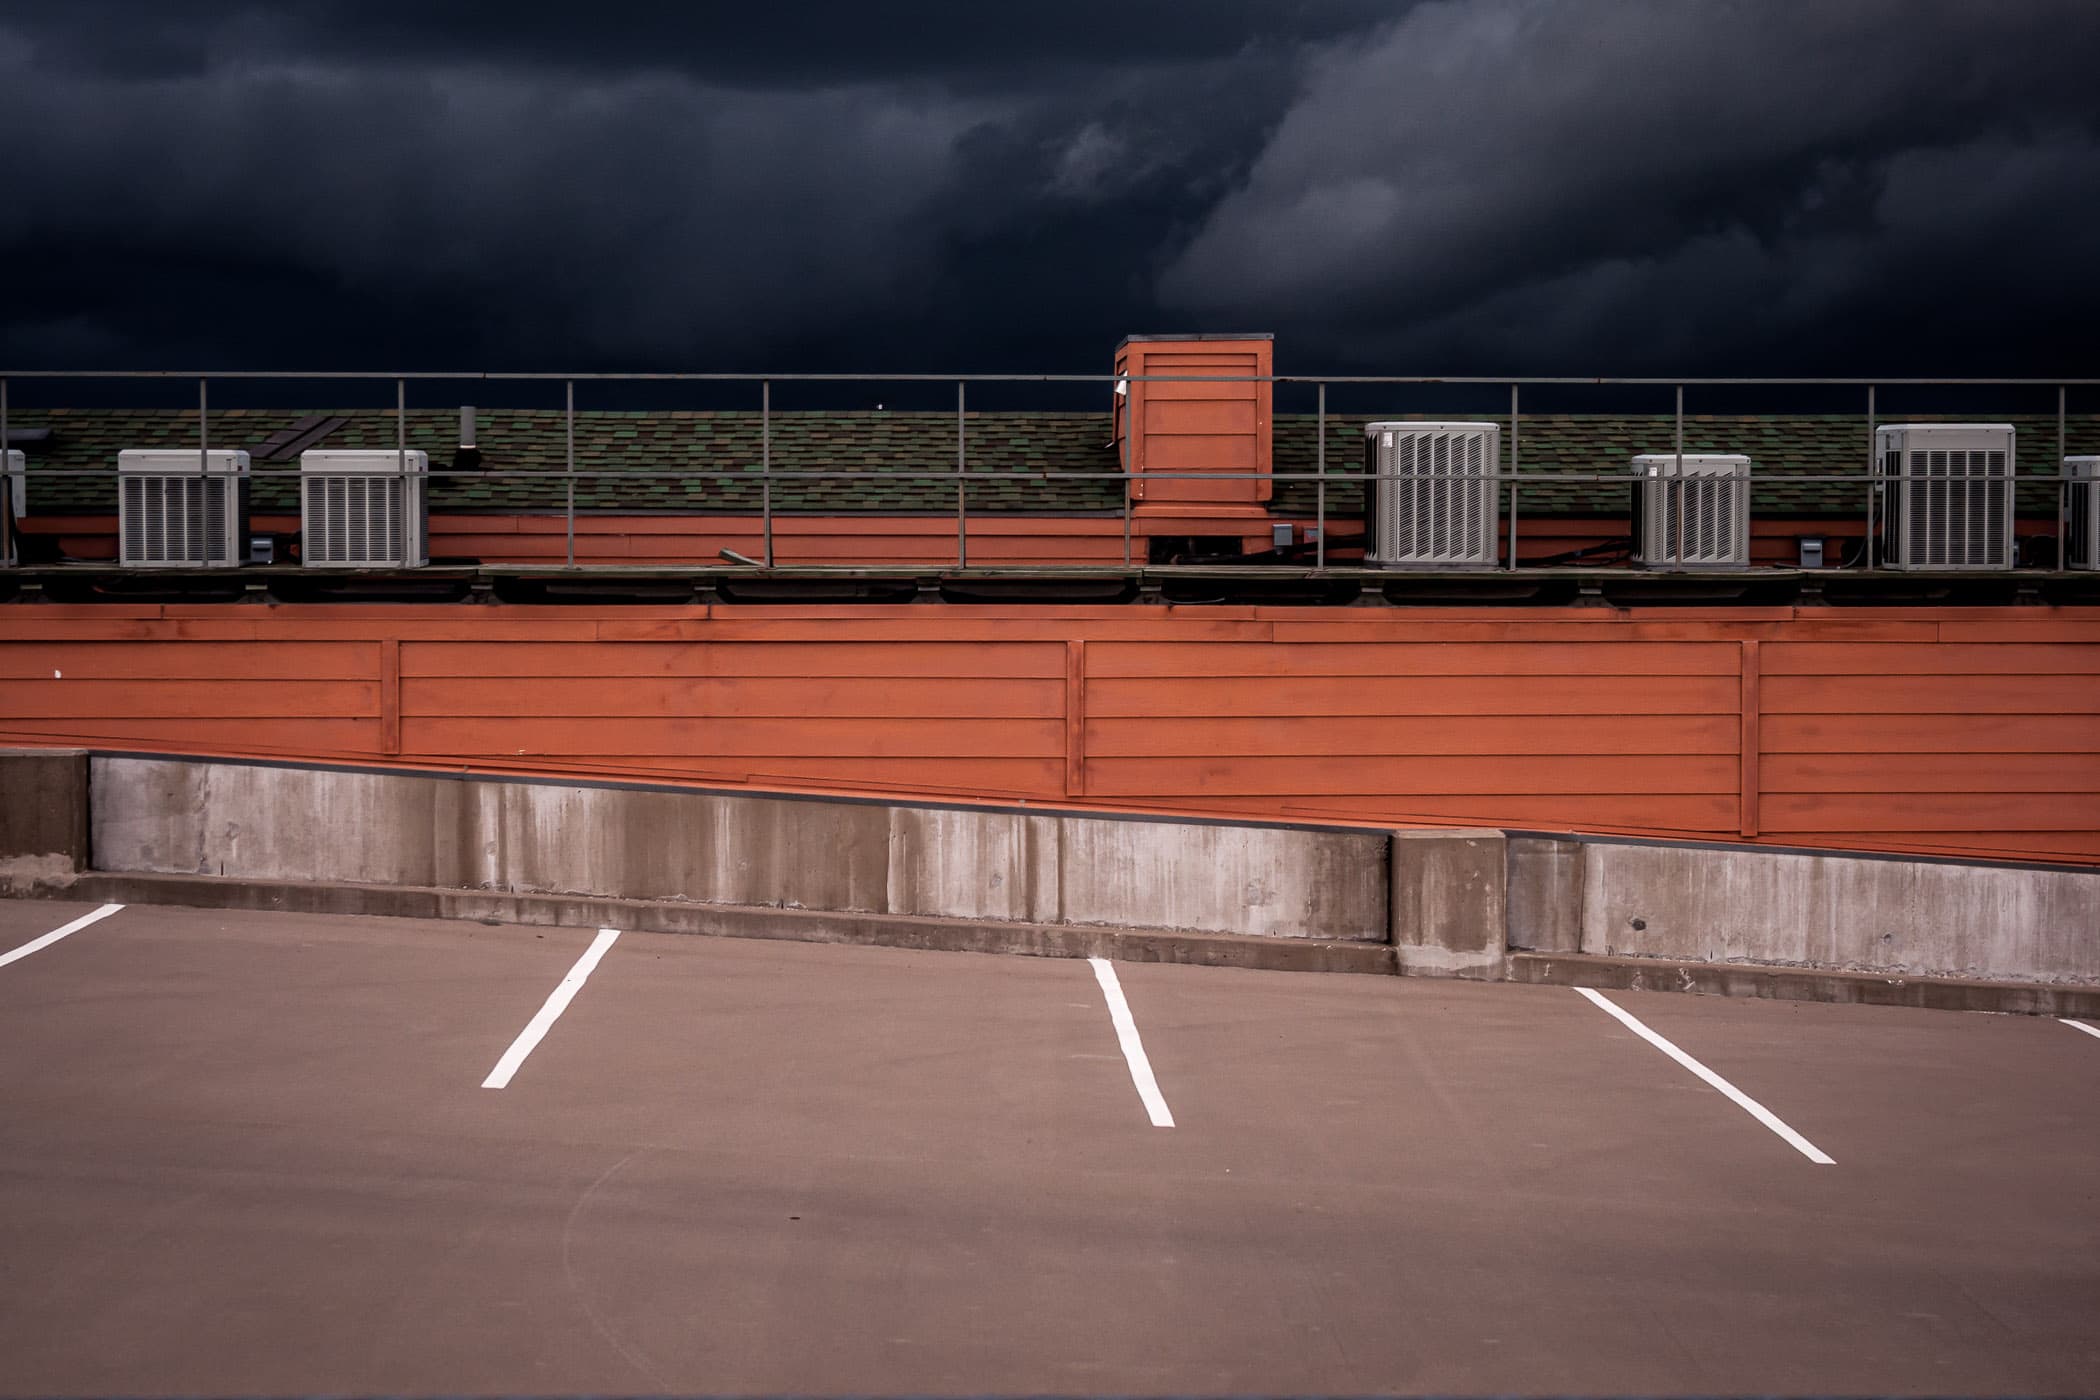 Storm clouds rolling into Collin County, as seen from the Eastside Village parking garage in Downtown Plano, Texas.